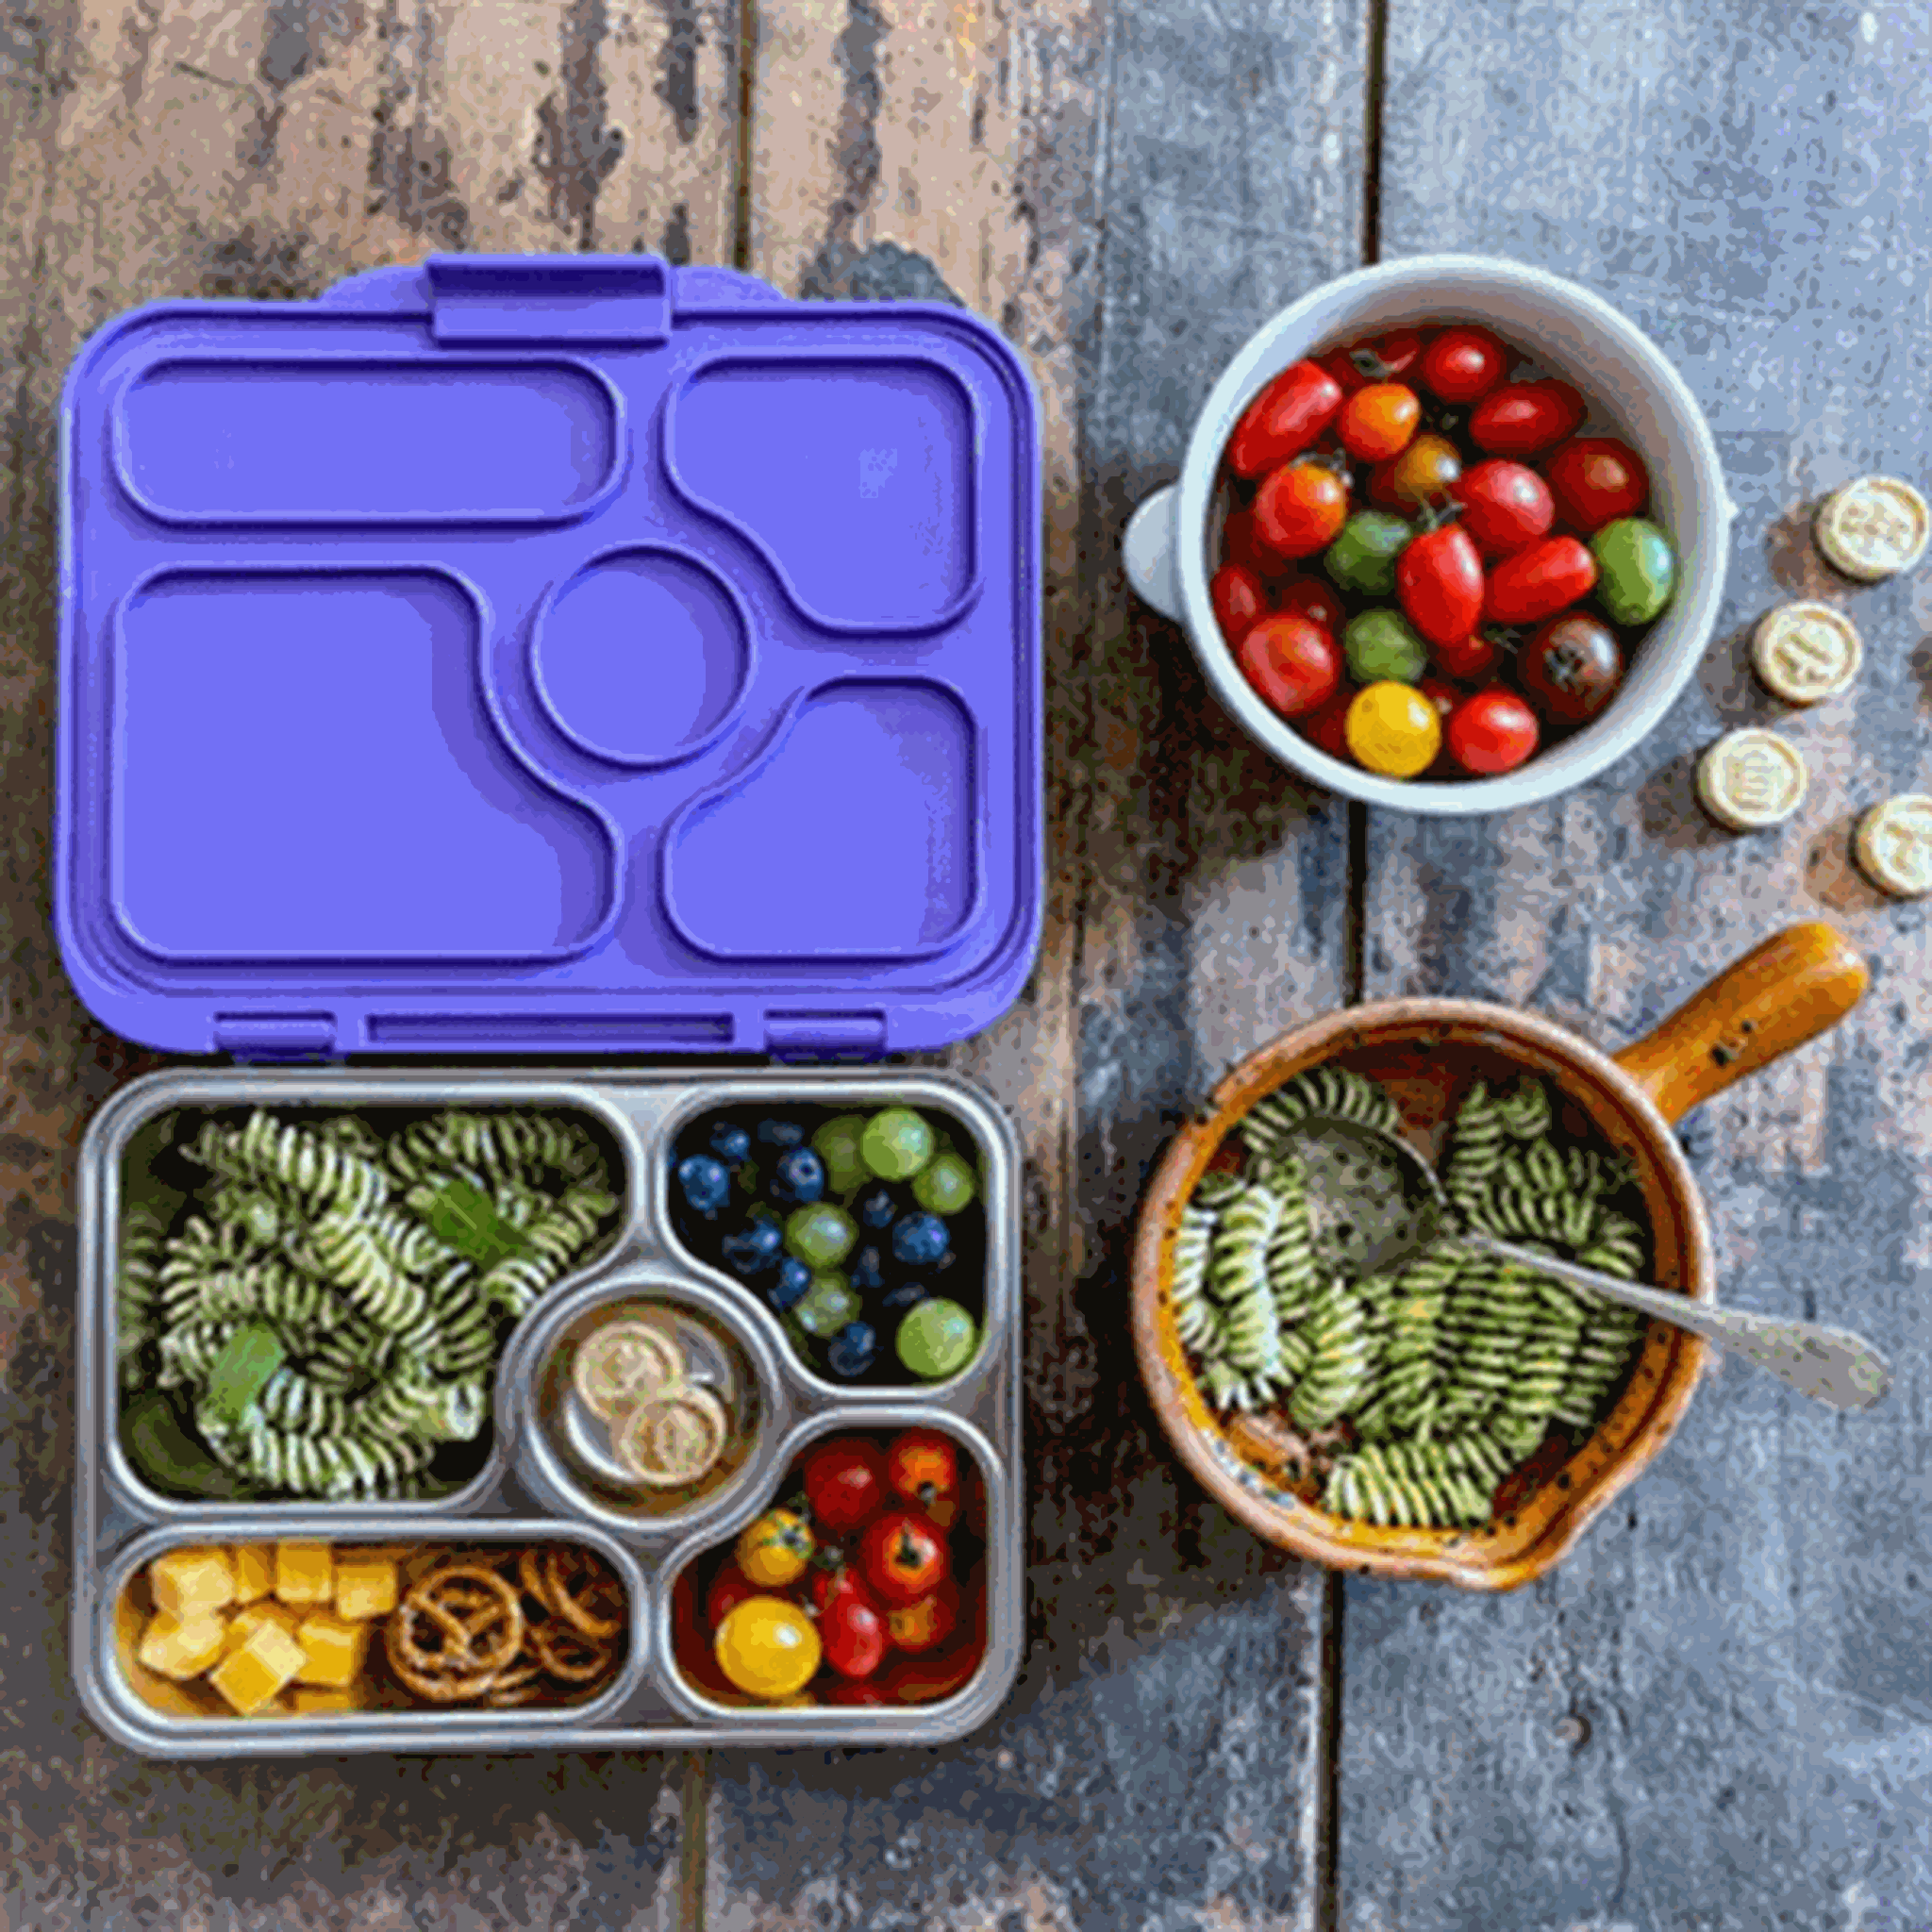 Yumbox Presto Stainless Steel Lunchlådor Remy Lavender 3